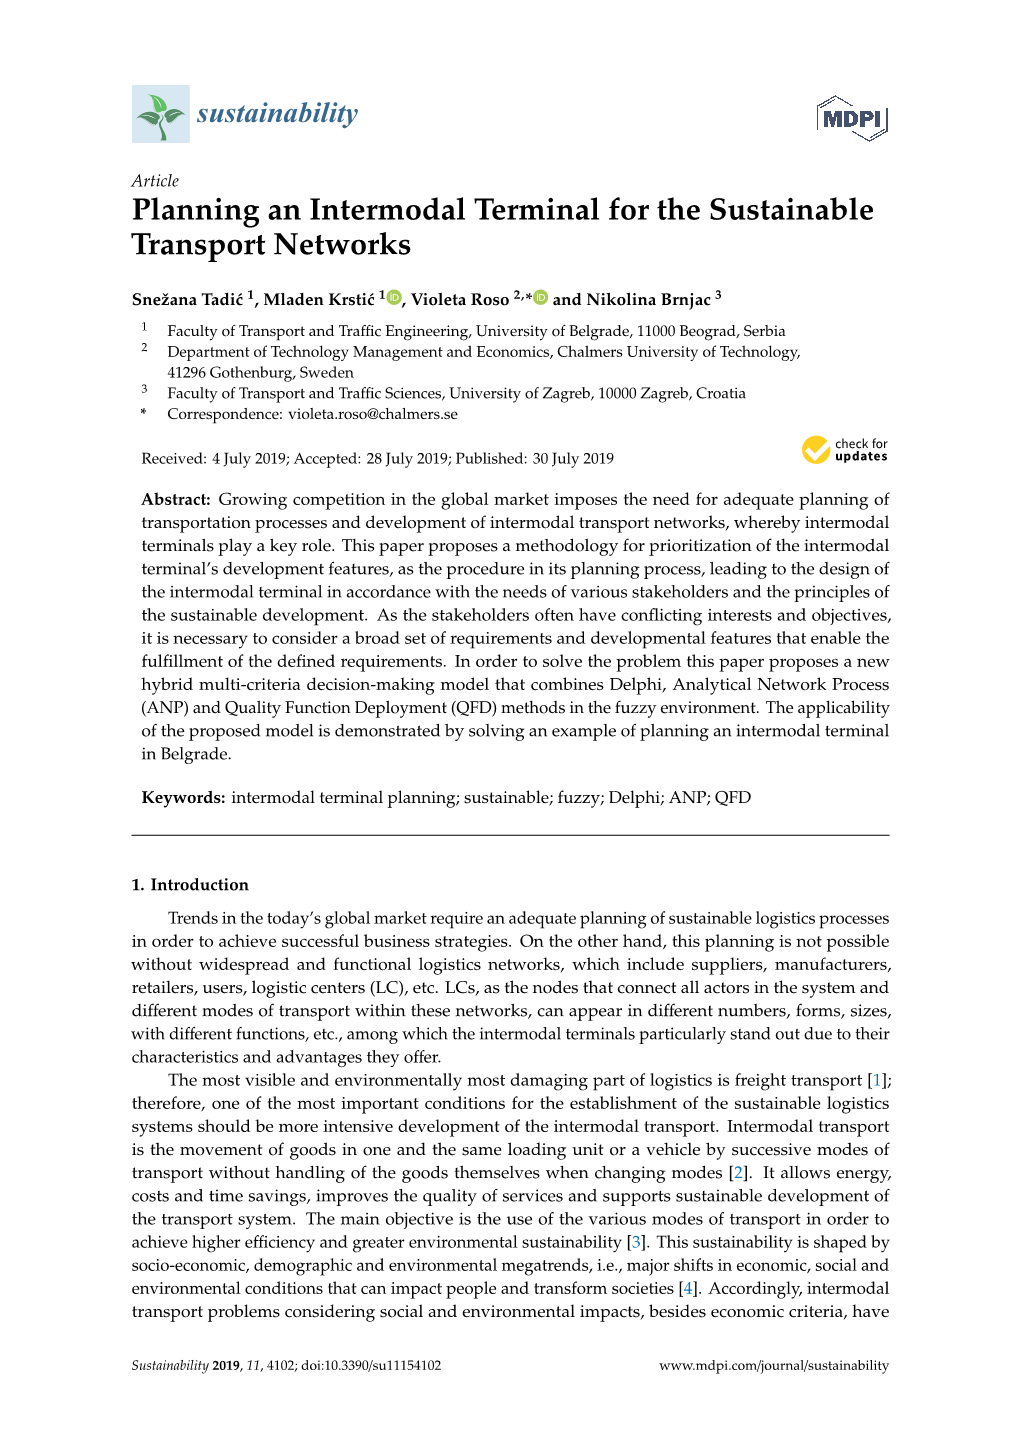 Planning an Intermodal Terminal for the Sustainable Transport Networks